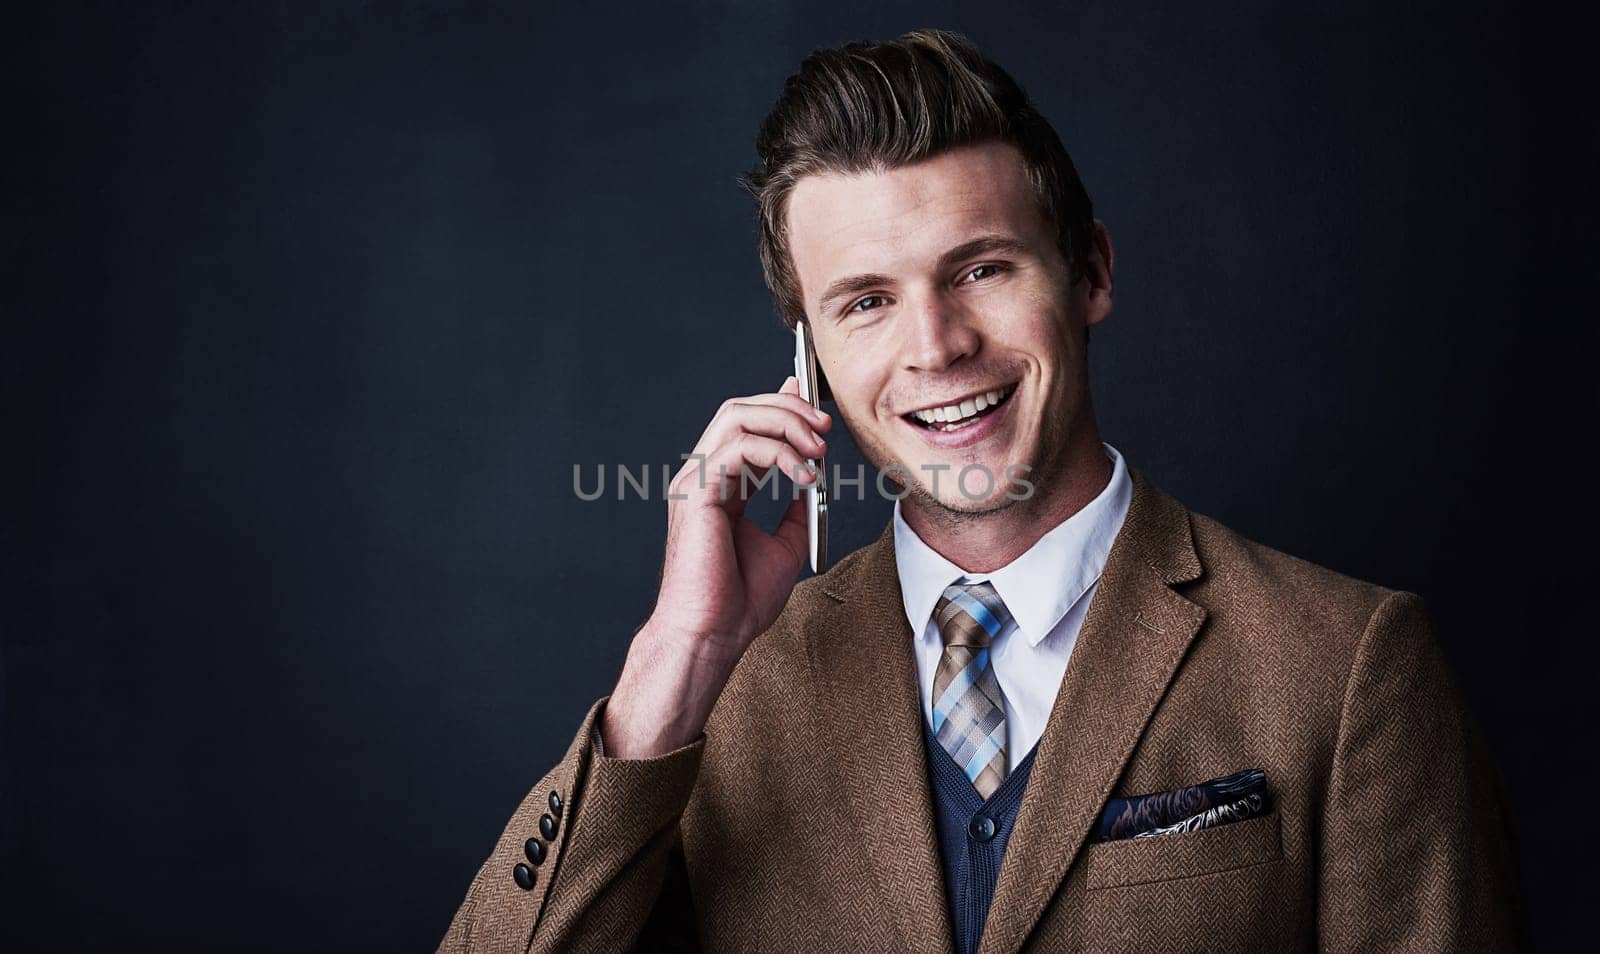 It feels good to be in business. Studio shot of a young businessman using his cellphone against a dark background